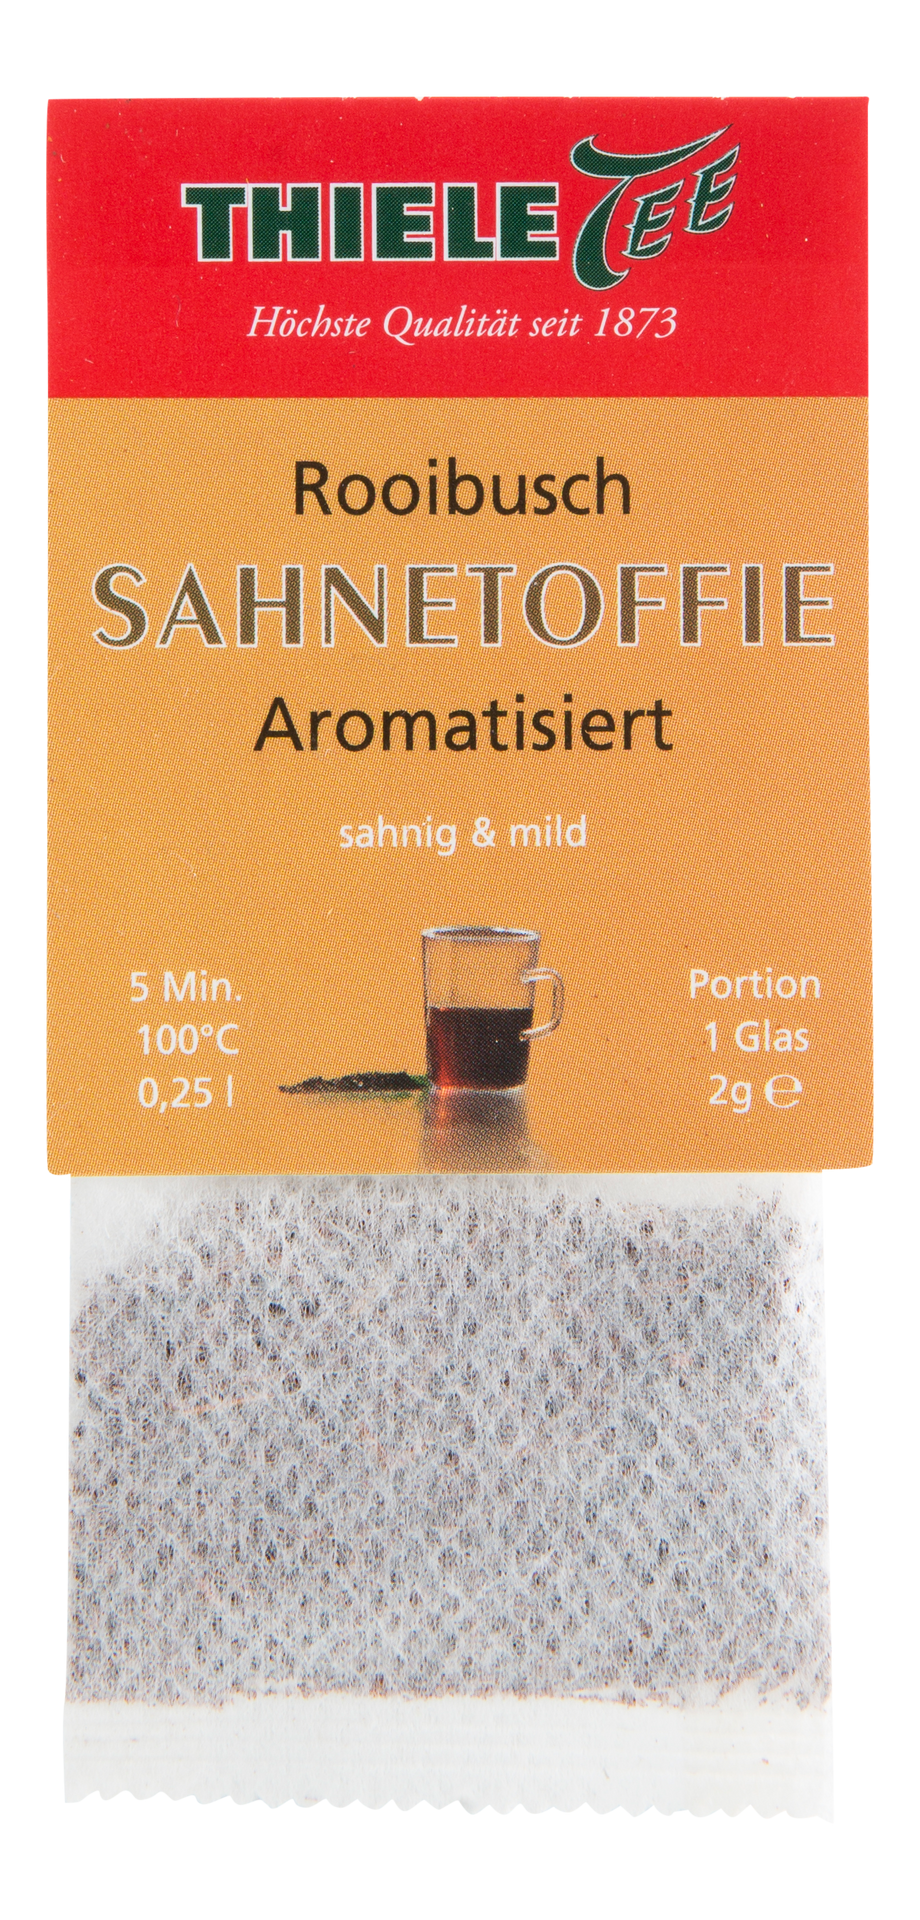 Edition Rooibos Sahne-Toffie 20 x 2g